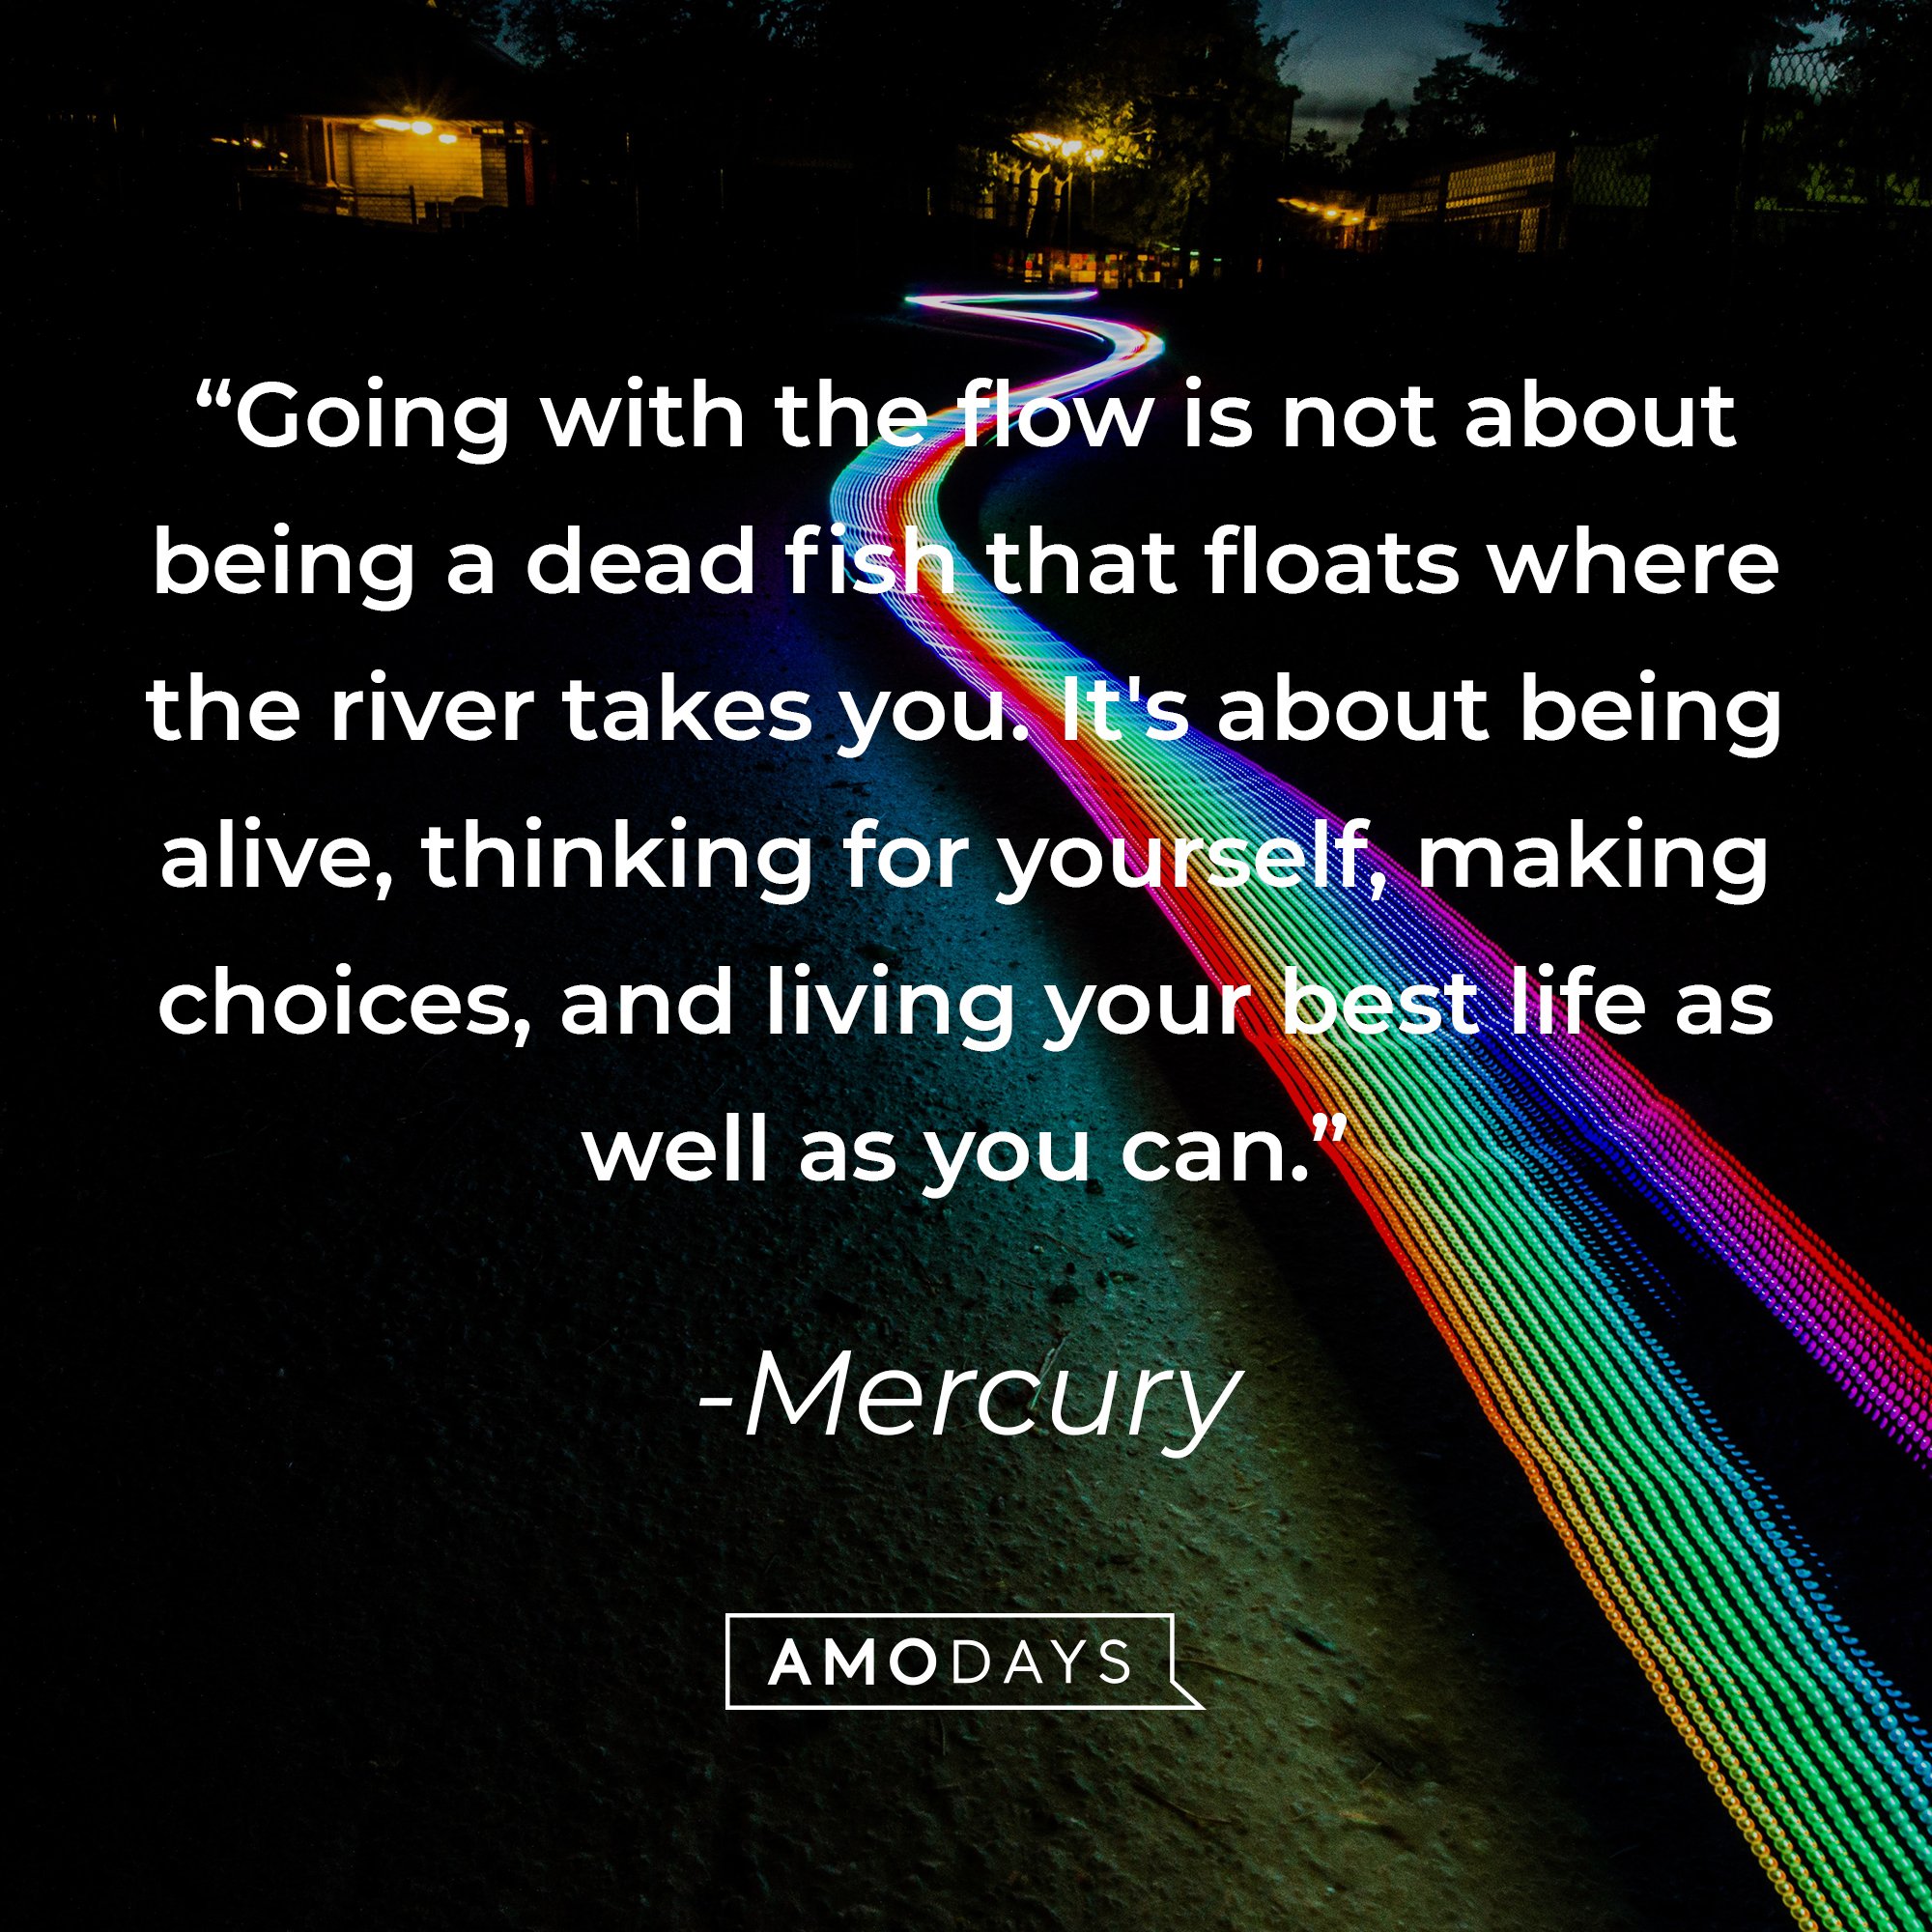 Mercury's quote: "Going with the flow is not about being a dead fish that floats where the river takes you. It's about being alive, thinking for yourself, making choices, and living your best life as well as you can." | Image: AmoDays